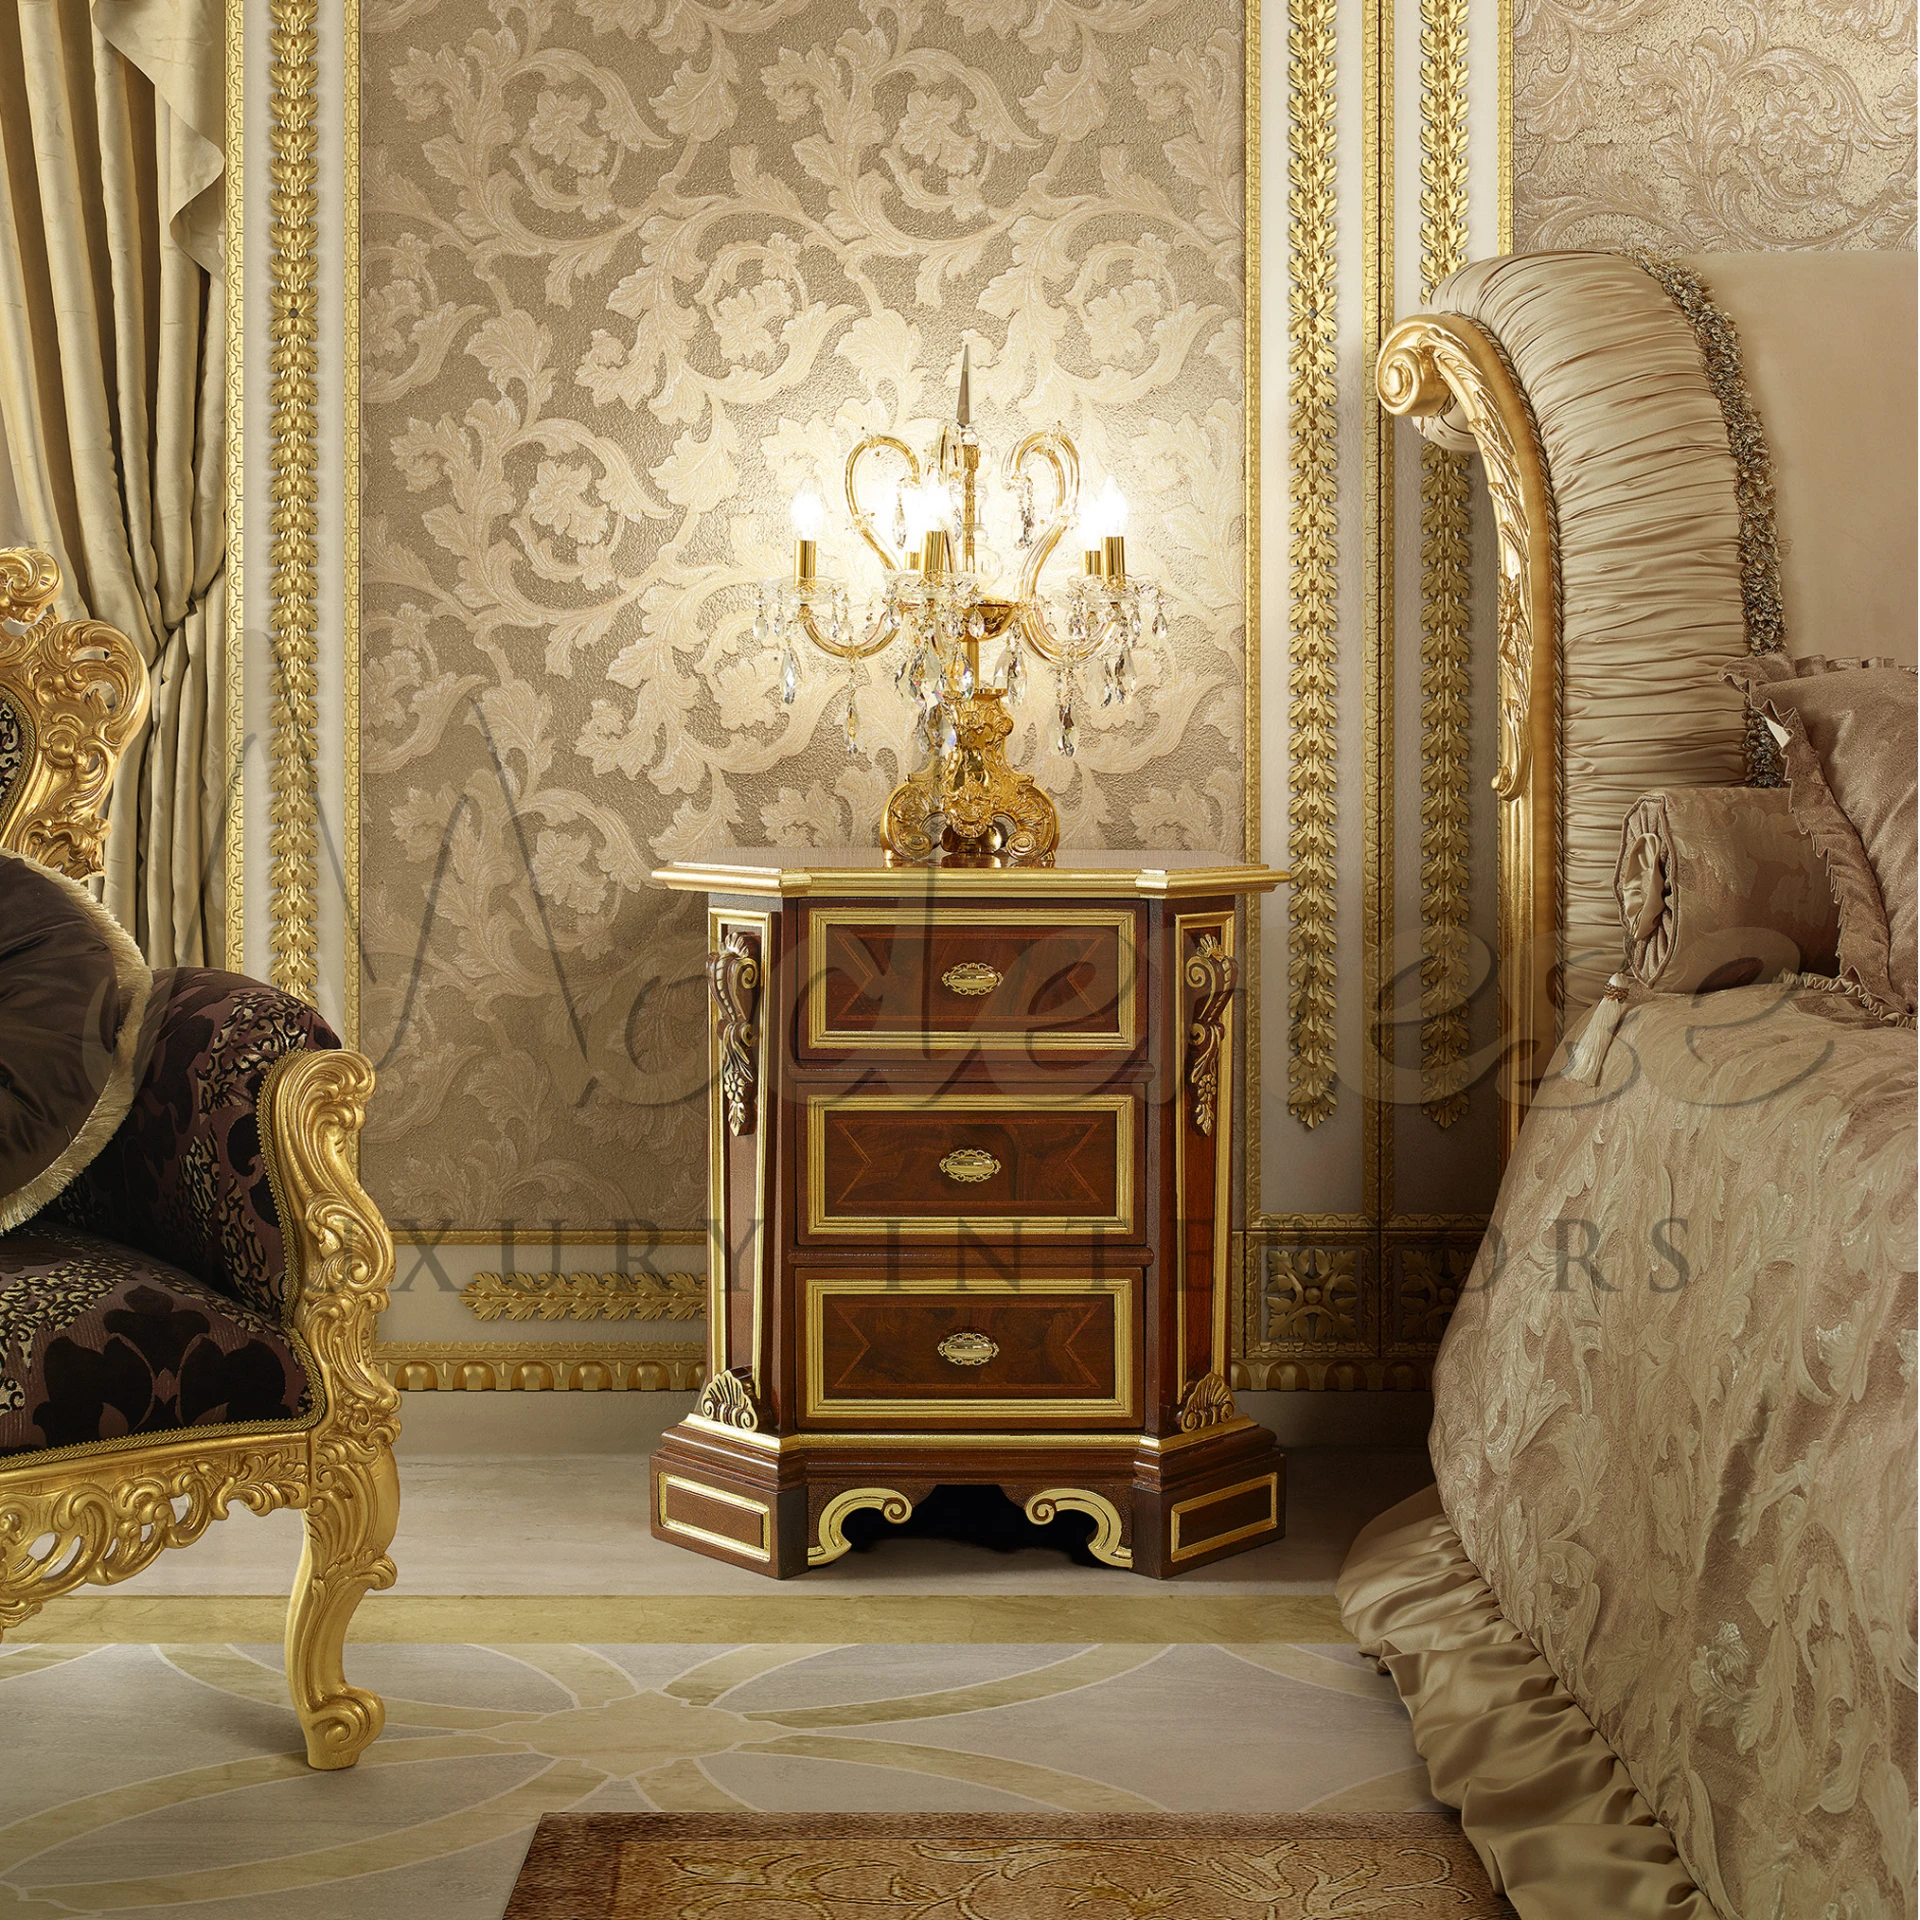 The focal point is an elegant bedside table inlaid with geometric patterns and rich wood tones, featuring brass handles and marble top, upon which rests a lavish crystal candelabra lamp. 